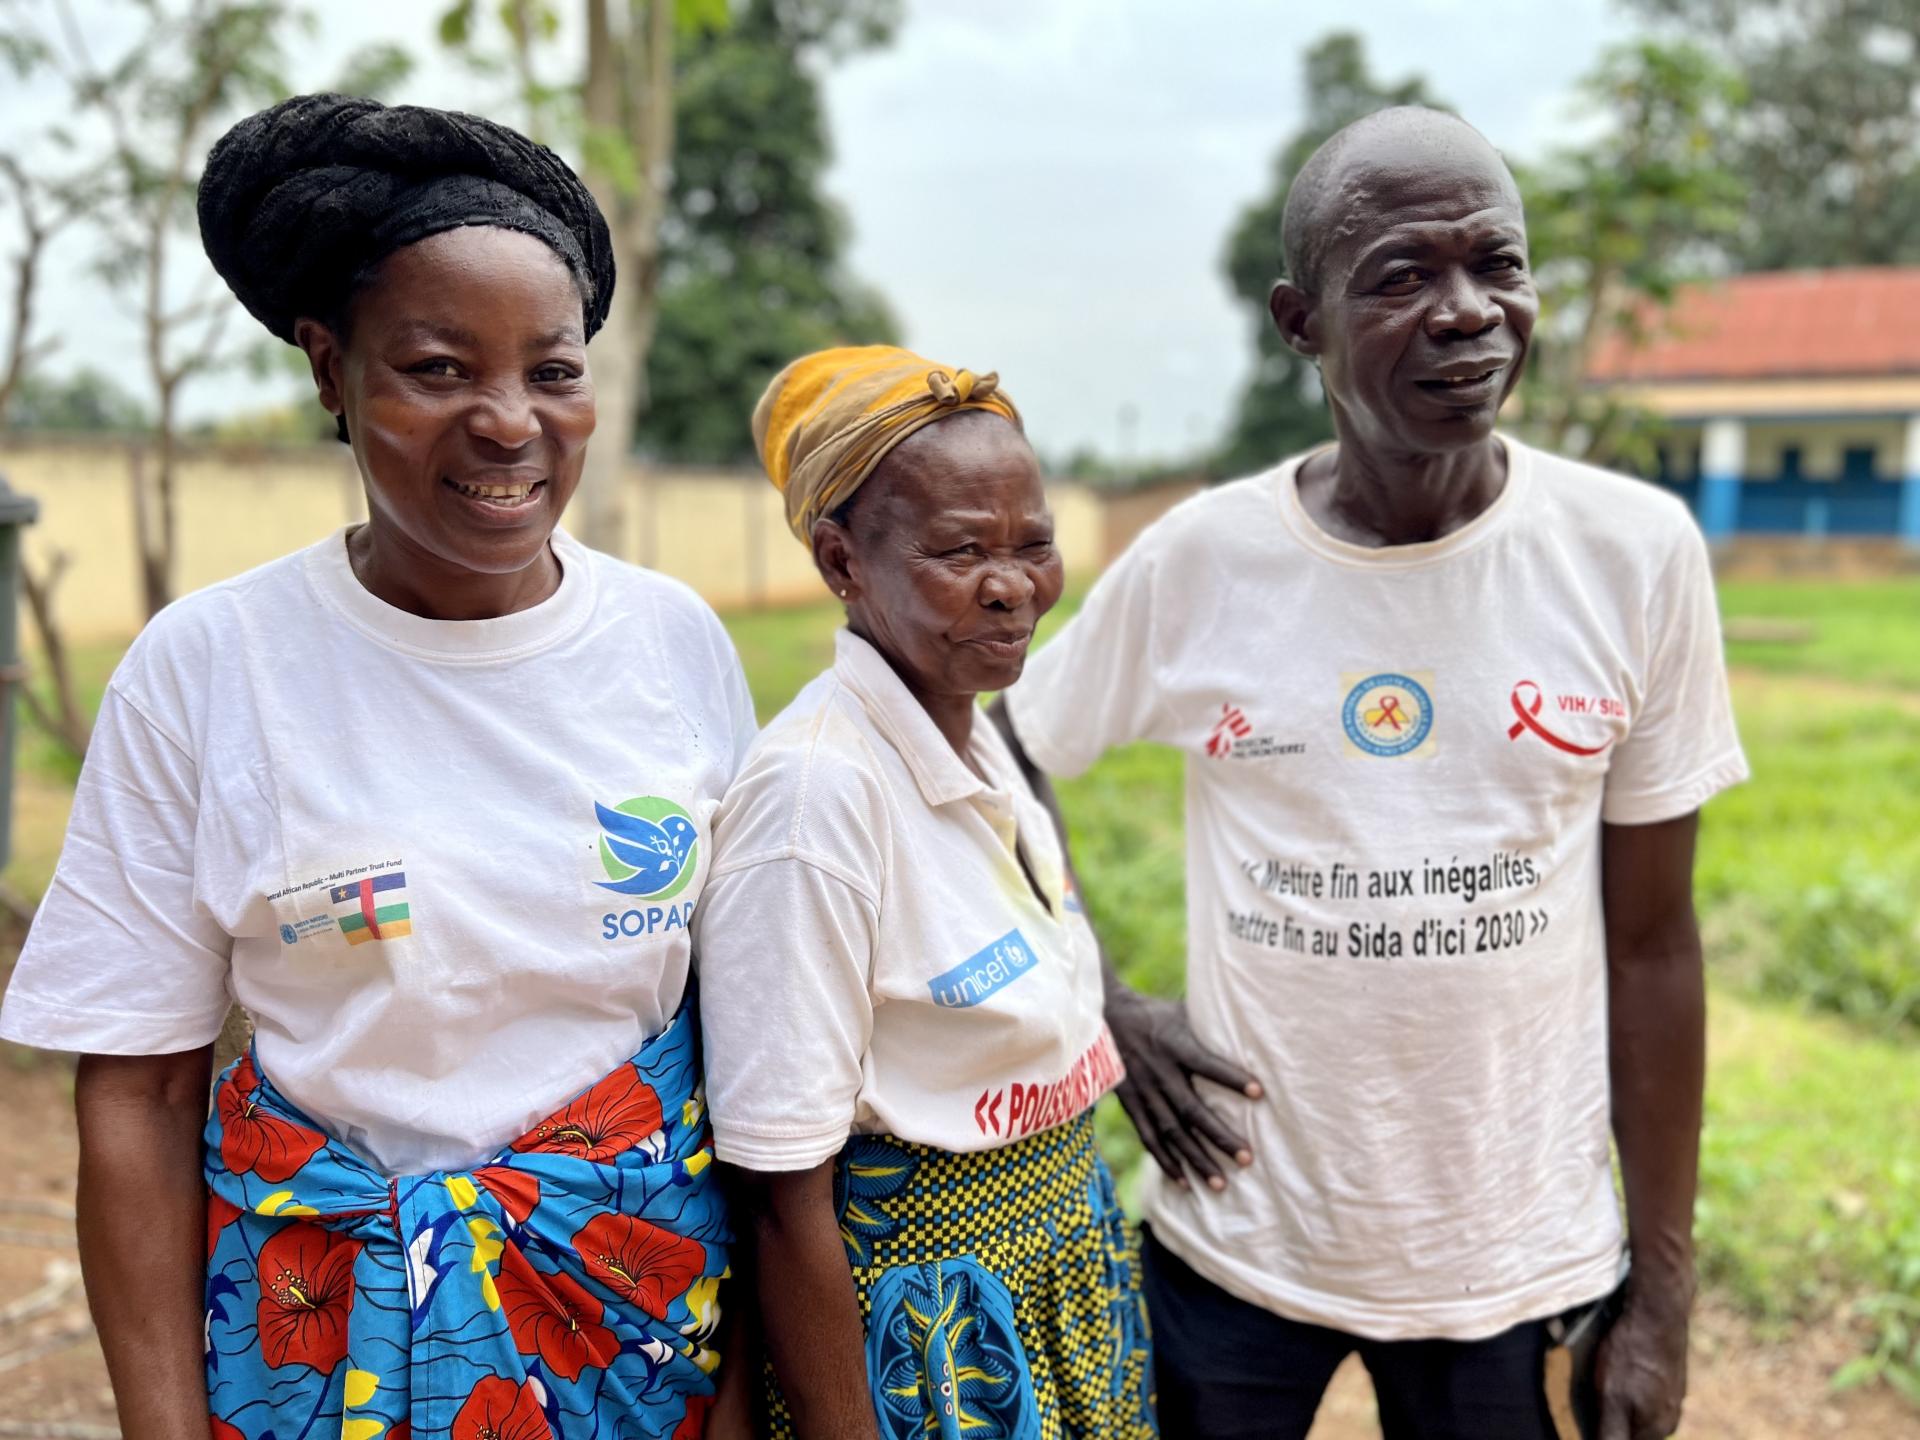 Central African Republic: community aid groups help HIV patients to live openly and confidently